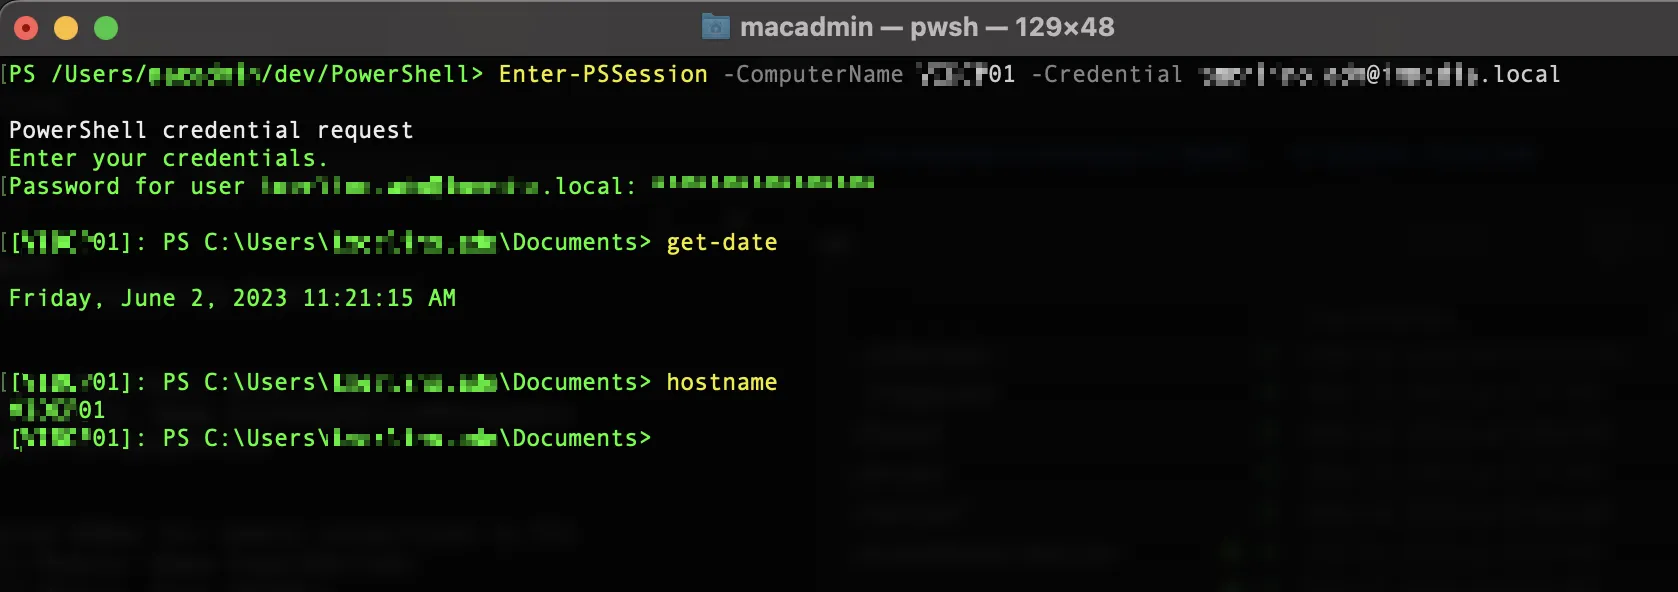 Screenshot of successful PowerShell connection from Mac to PC